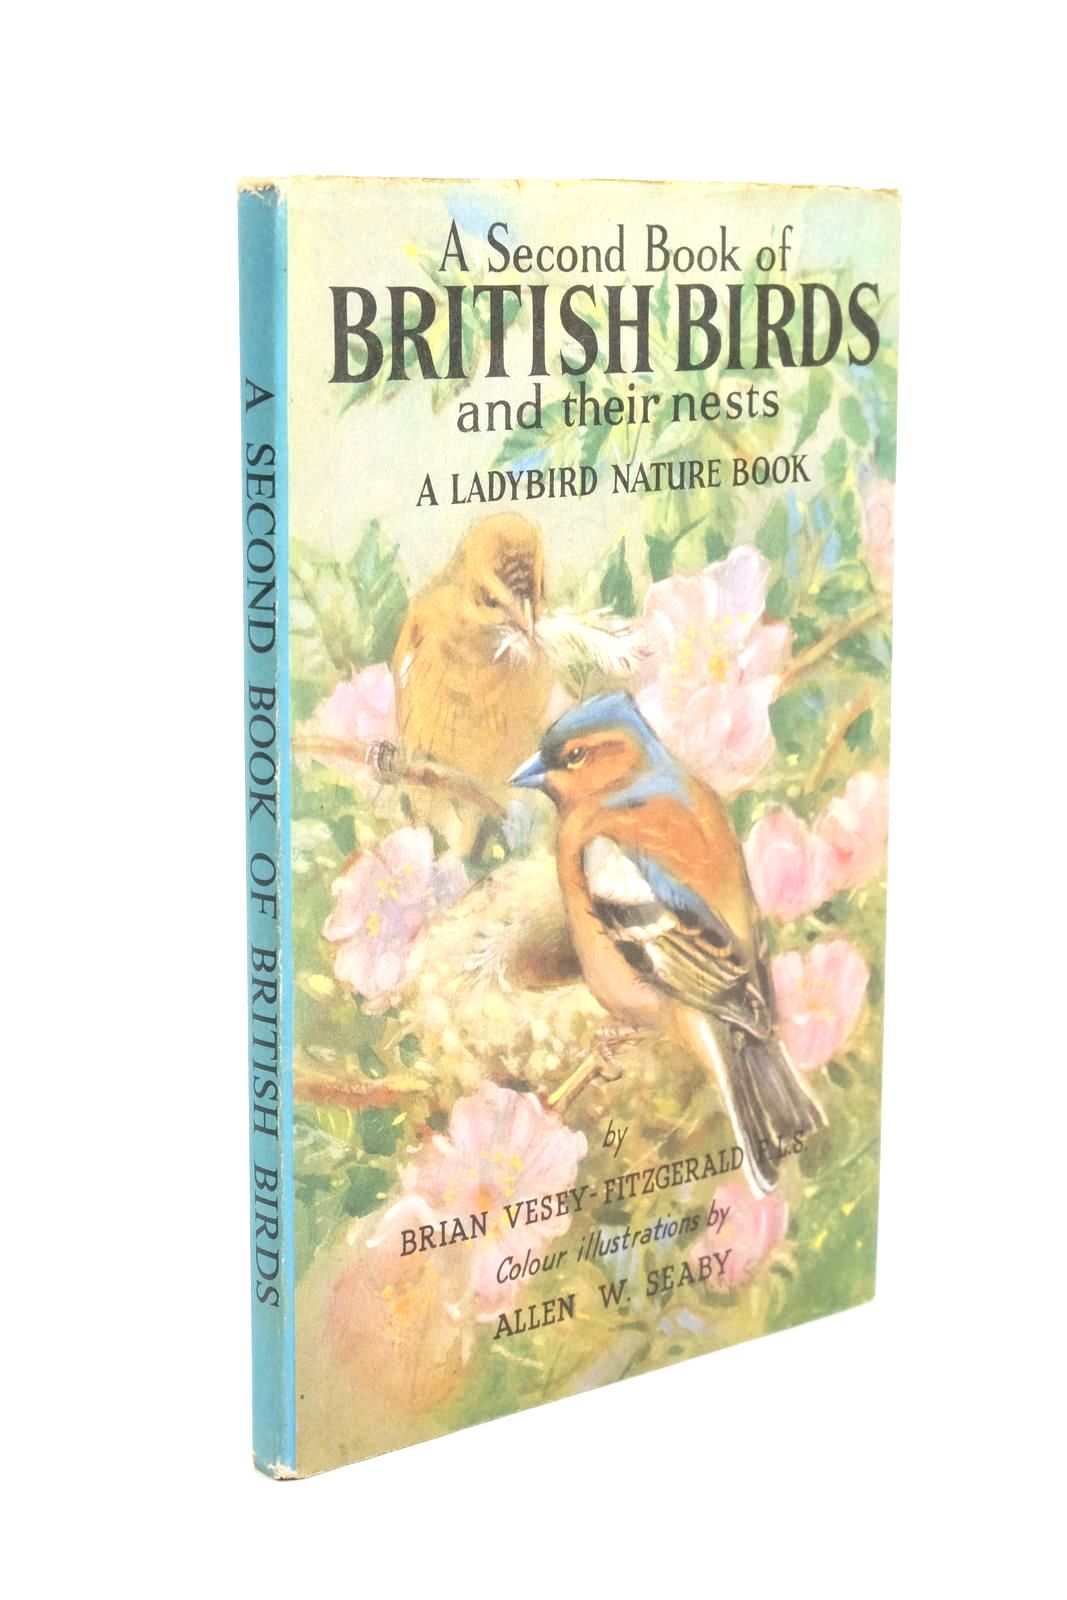 Photo of A SECOND BOOK OF BRITISH BIRDS AND THEIR NESTS written by Vesey-Fitzgerald, Brian illustrated by Seaby, Allen W. published by Wills & Hepworth Ltd. (STOCK CODE: 1322142)  for sale by Stella & Rose's Books